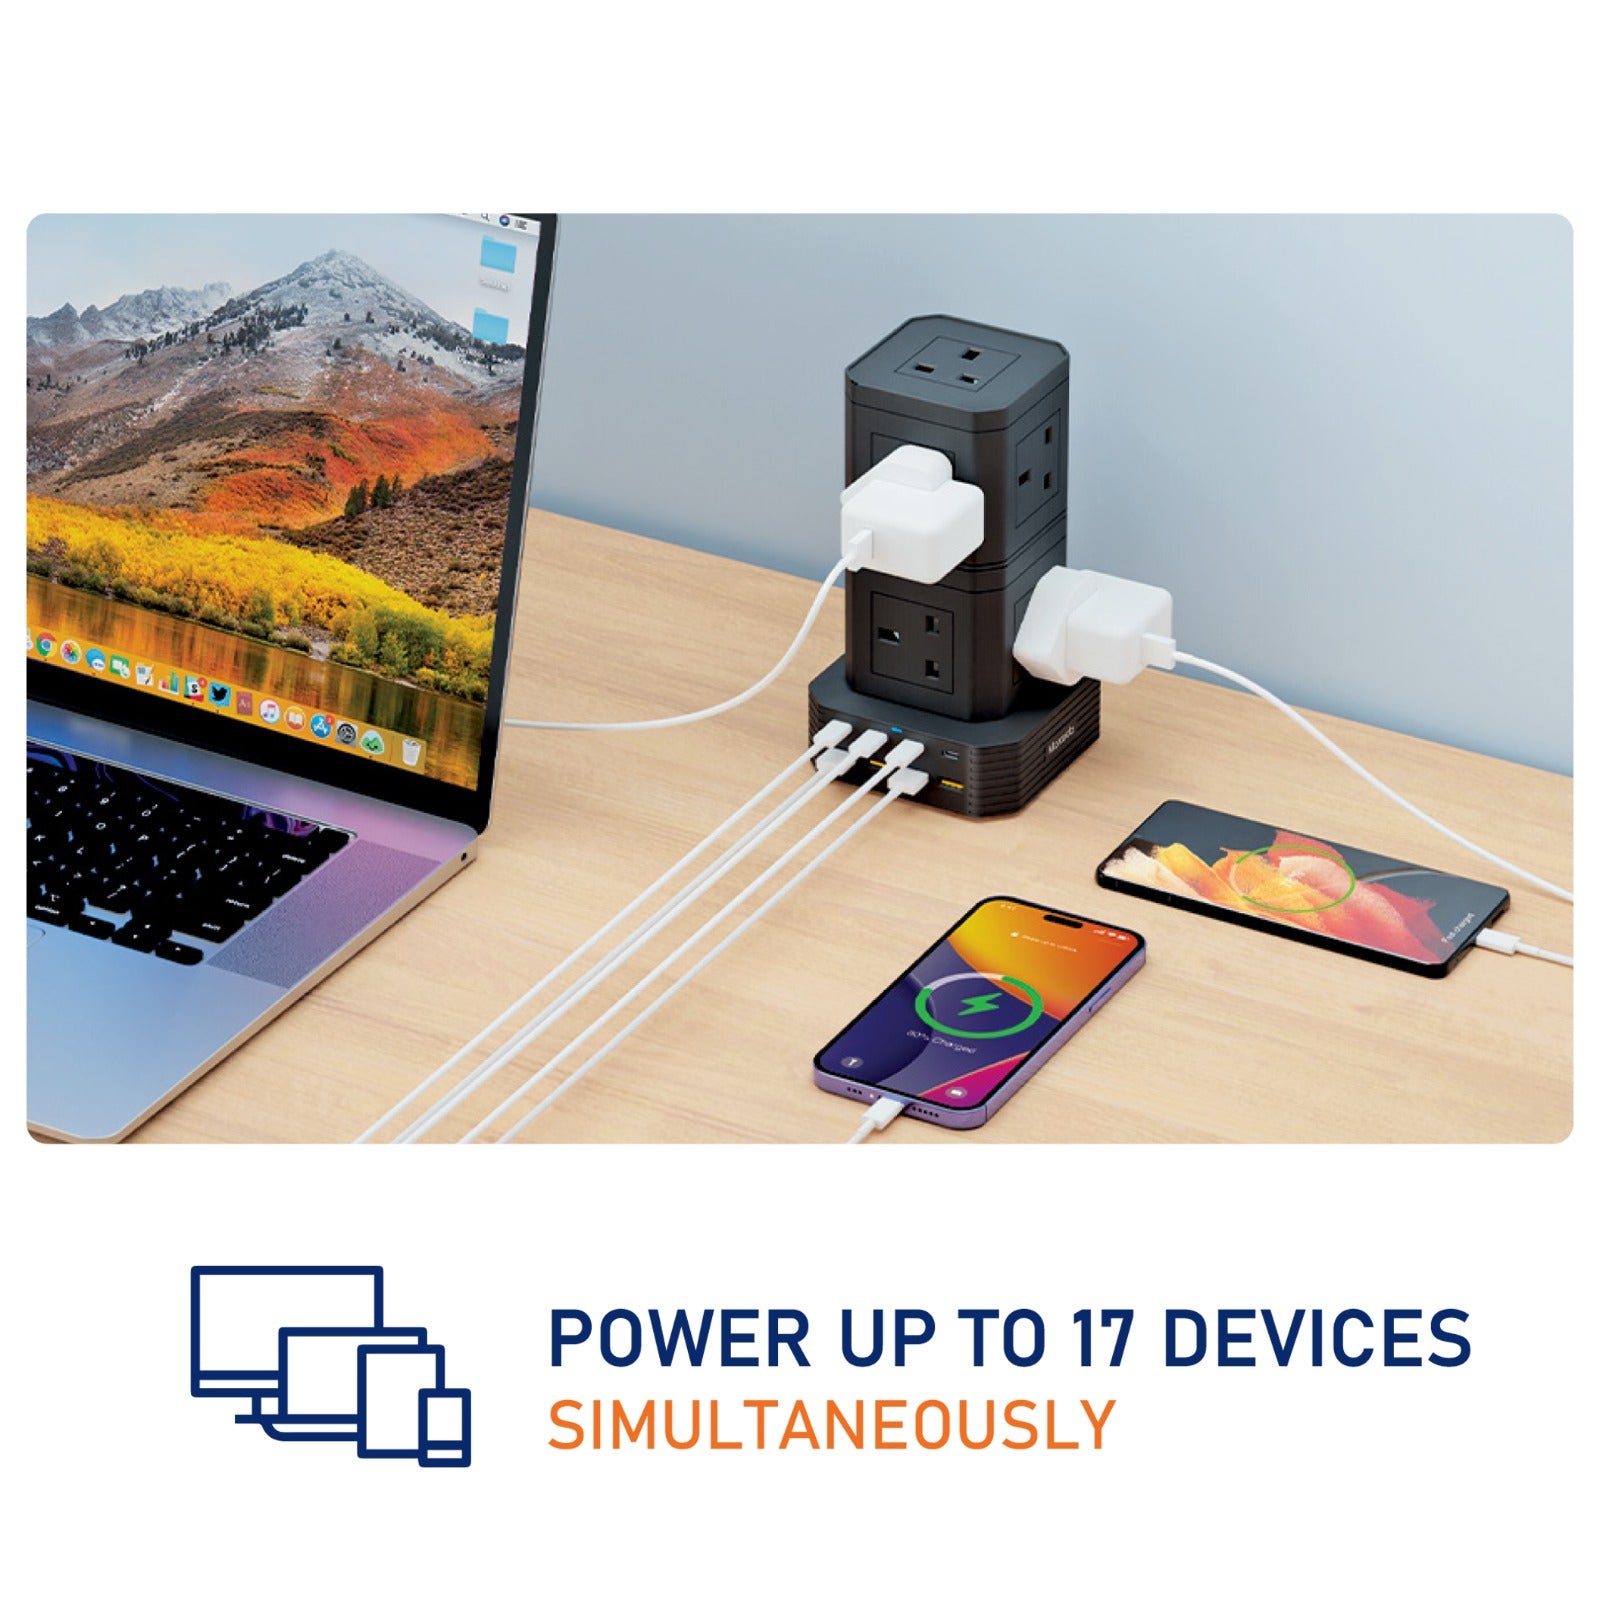 mobile, lap and even other devices are connected to Smart Hub Power Strip at the same time